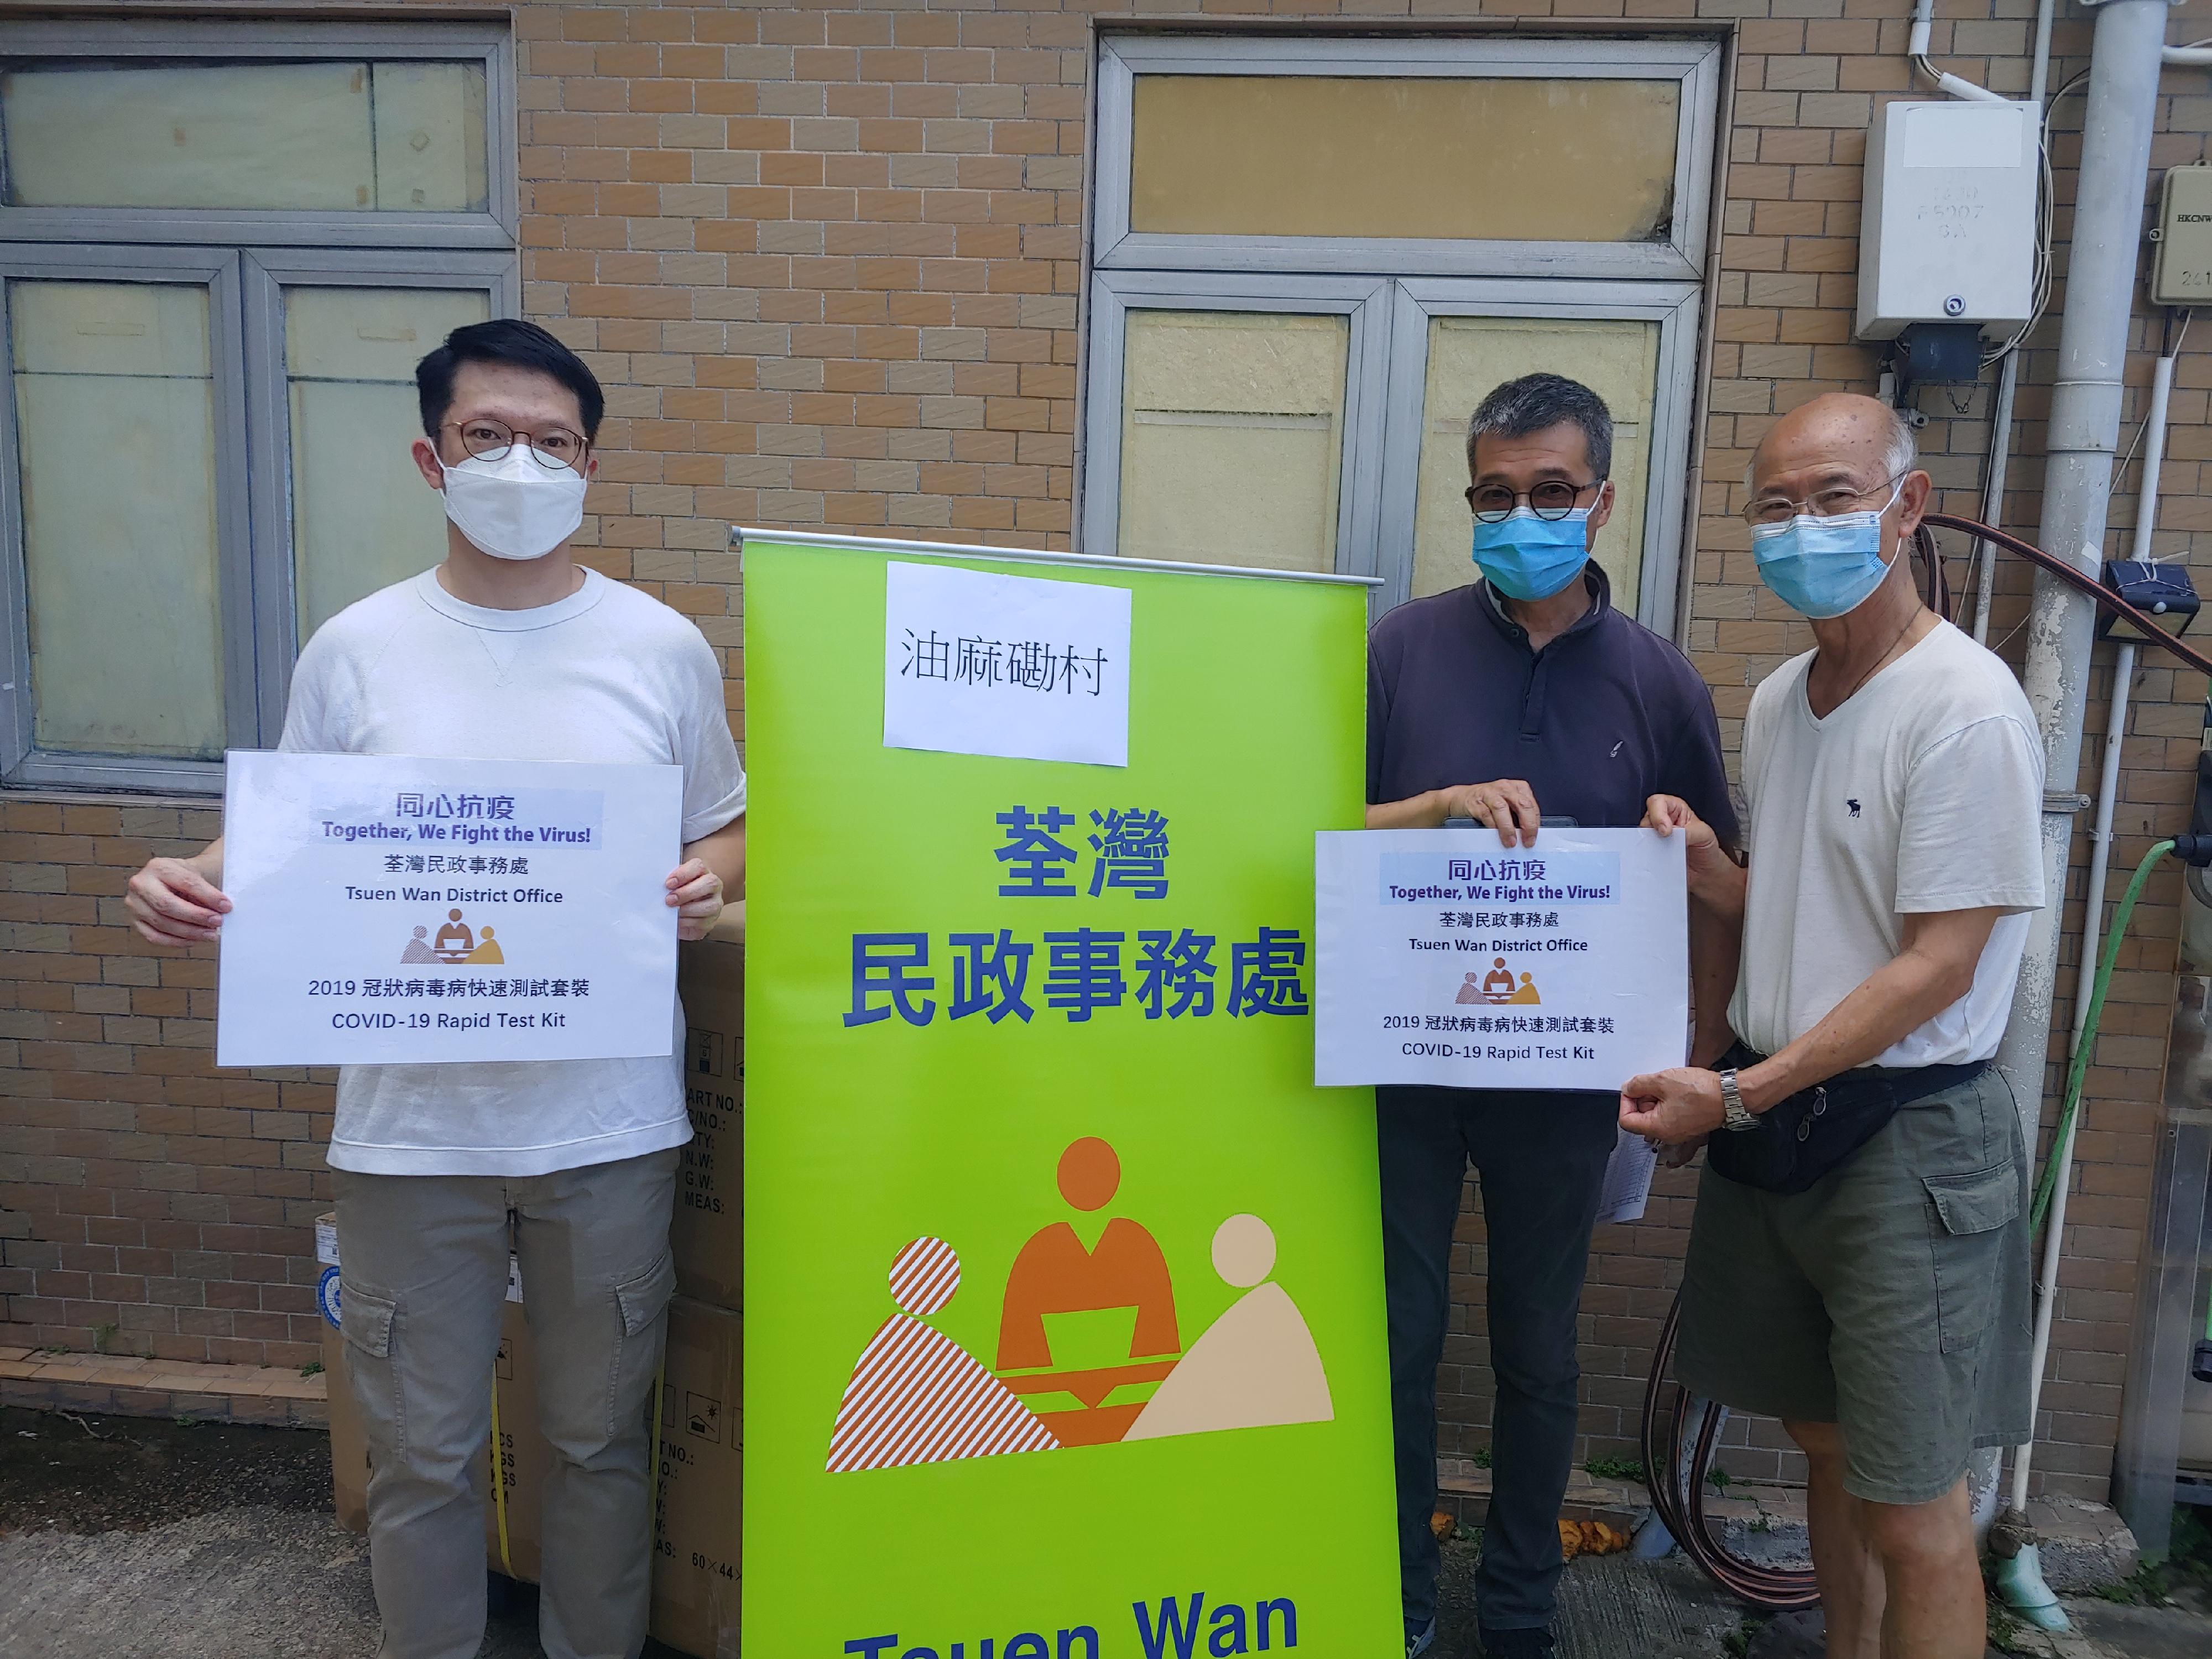 The Tsuen Wan District Office today (July 26) distributed COVID-19 rapid test kits to households living in Yau Ma Hom Resite Village for voluntary testing through the Village Representative. 